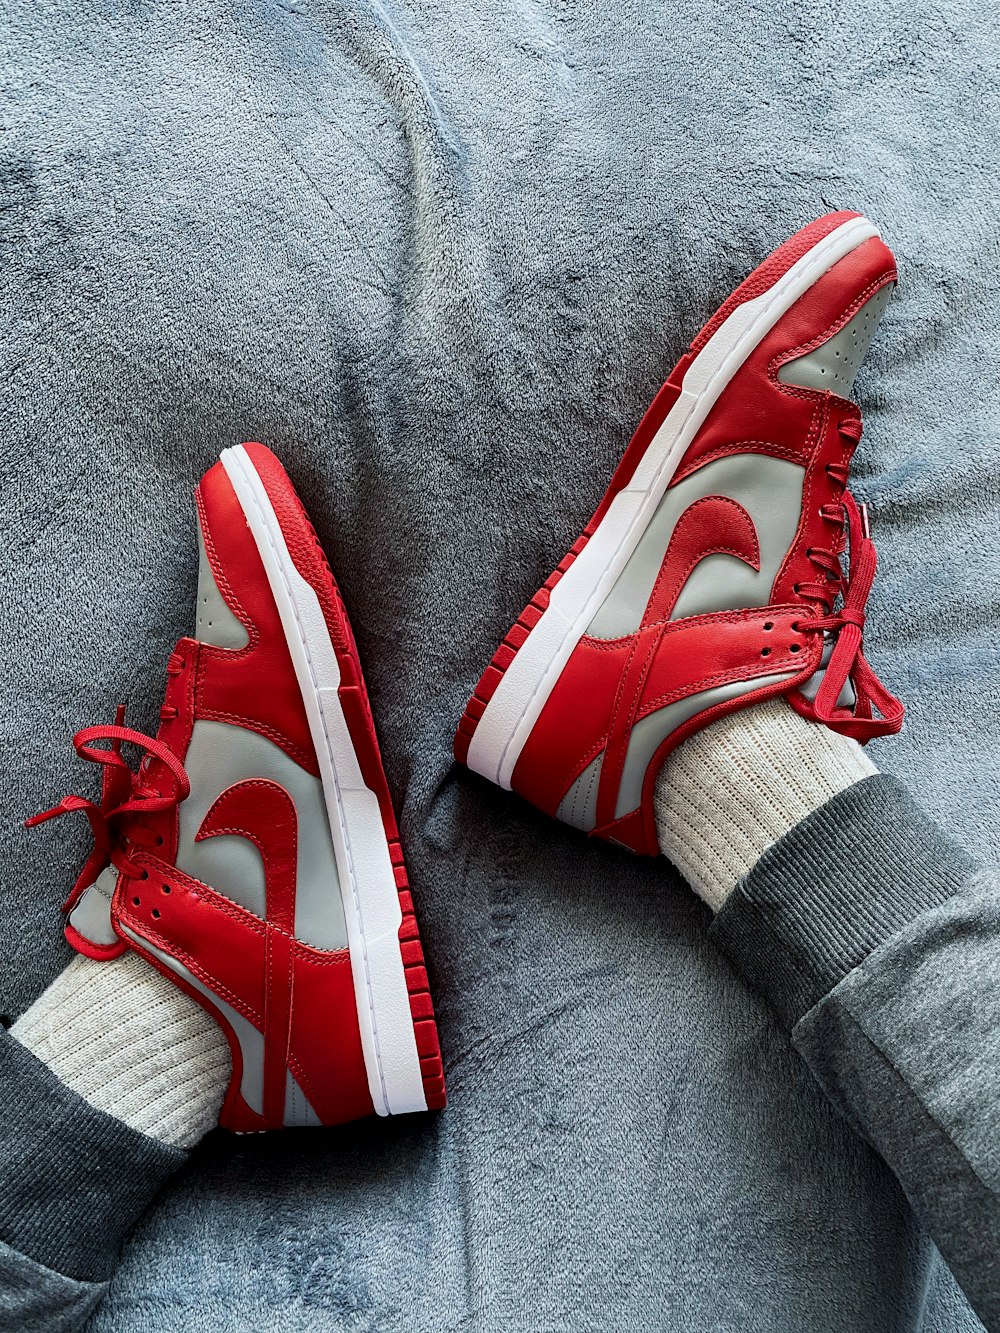 person wearing red and white nike sneakers photo – Free Vertical wallpaper  Image on Unsplash